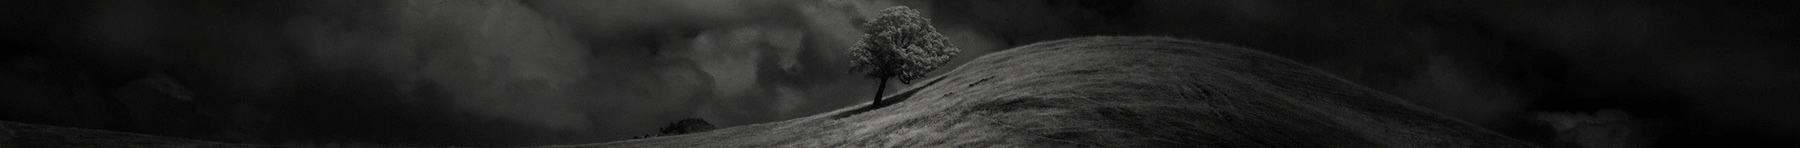 Nathan Wirth's profile banner